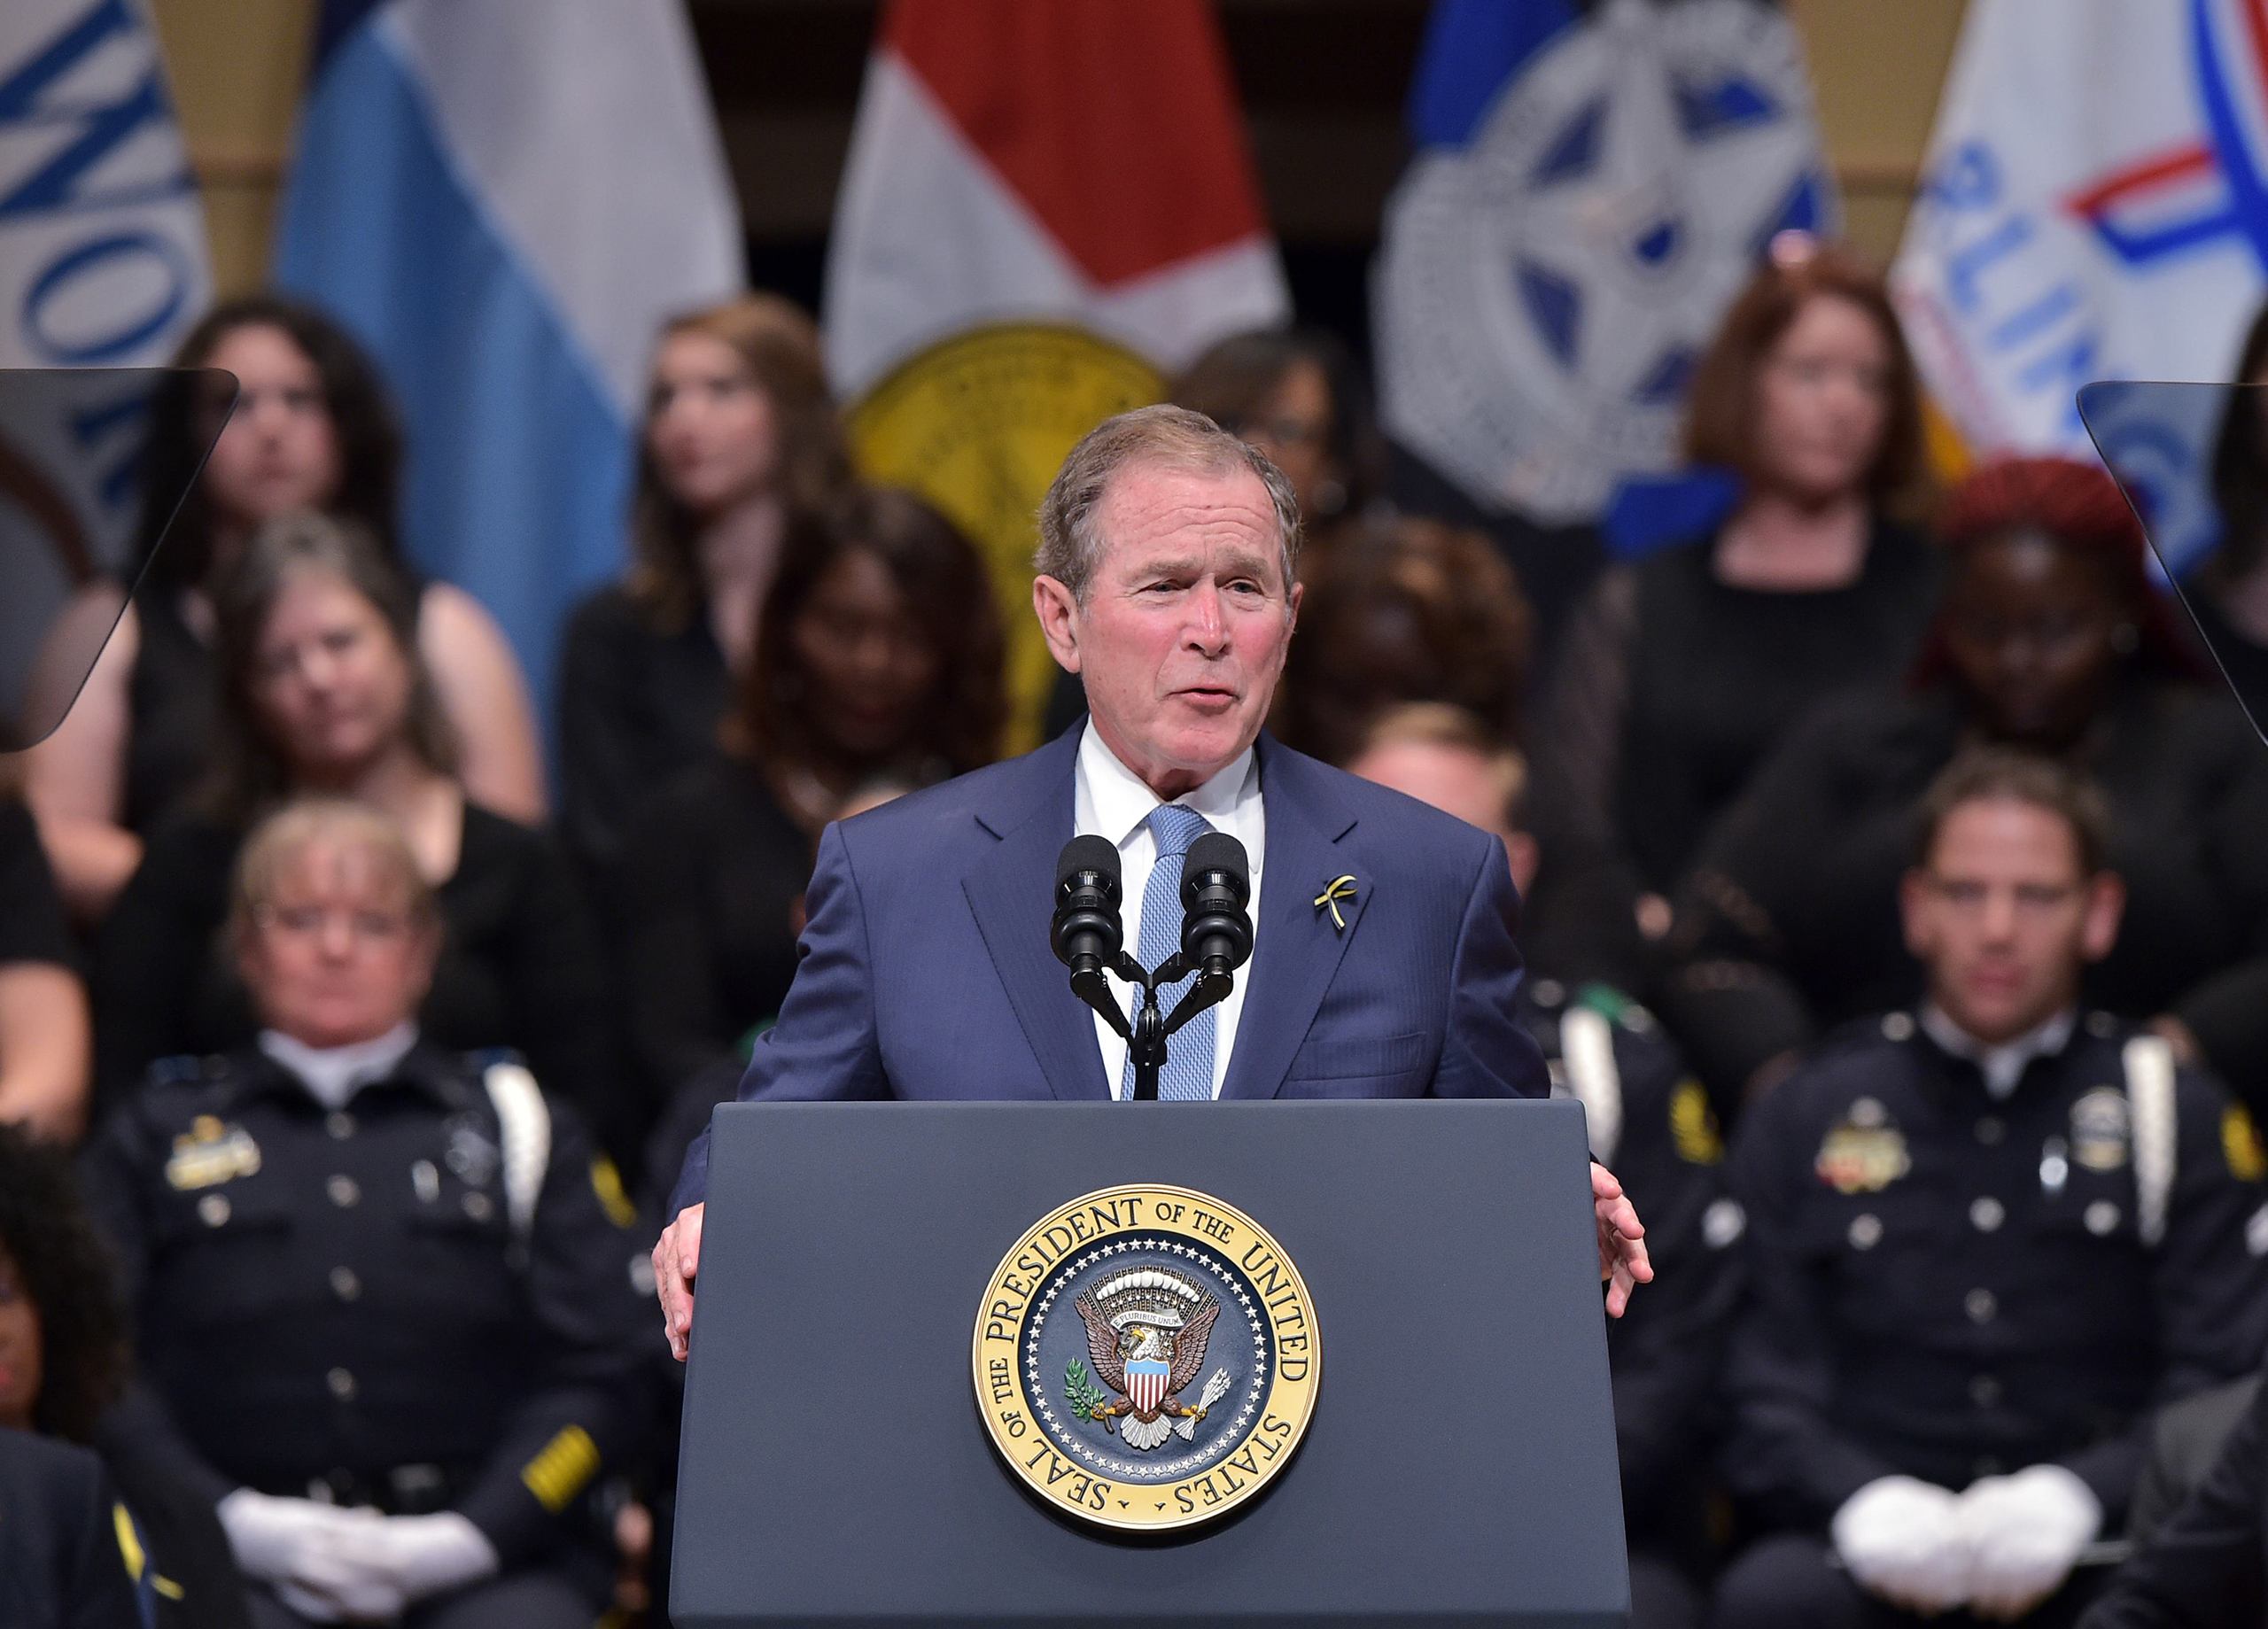 George W. Bush speaks during an interfaith memorial service for the victims of the Dallas police shooting at the Morton H. Meyerson Symphony Center in Dallas, Texas, on July 12, 2016. (Mandel Ngan—AFP/Getty Images)